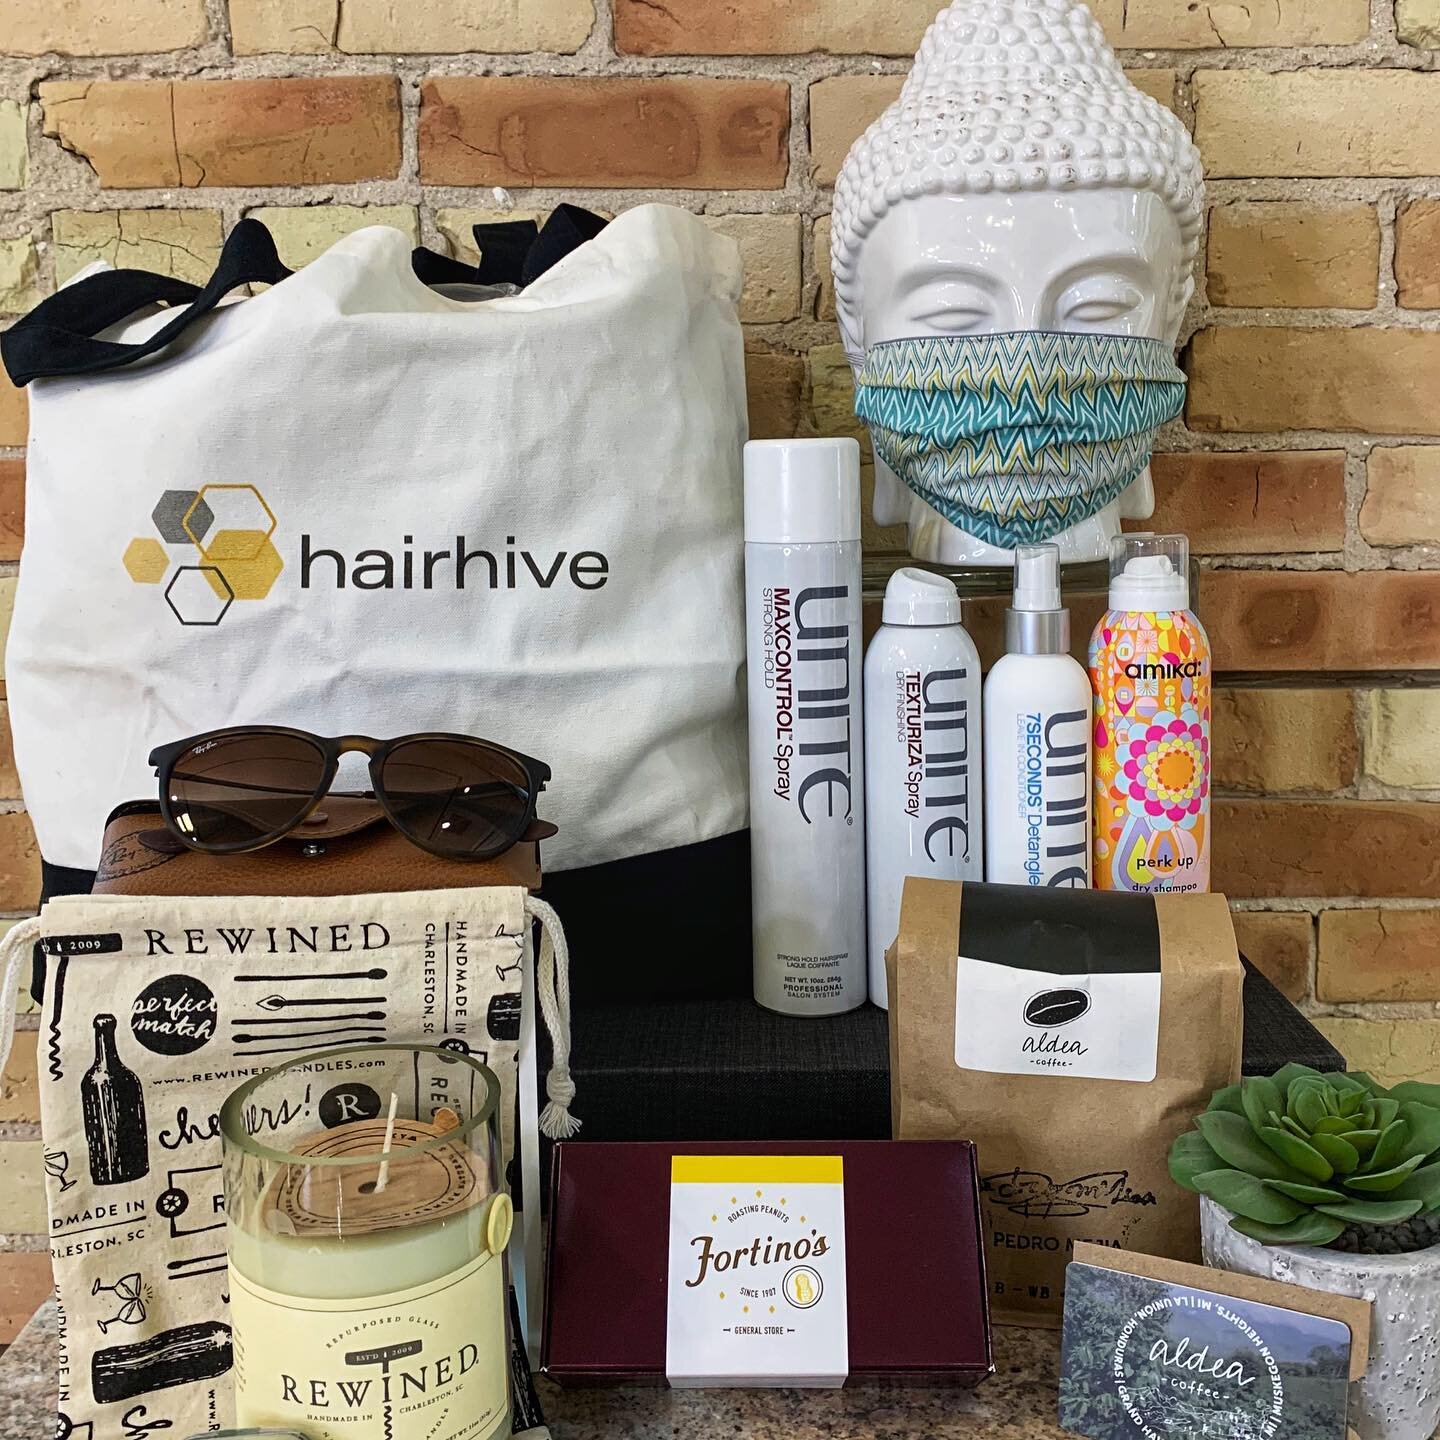 Mother&rsquo;s Day Giveaway
Includes
&bull; A canvas hairhive bag filled with our favorite hive products &bull; Erika Ray Ban Sunglasses 😎 @buffalo_bobs &bull; 25.00 gift card and coffee ☕️ @aldeacoffee &bull; Yummy chocolate truffles from Fortino&r